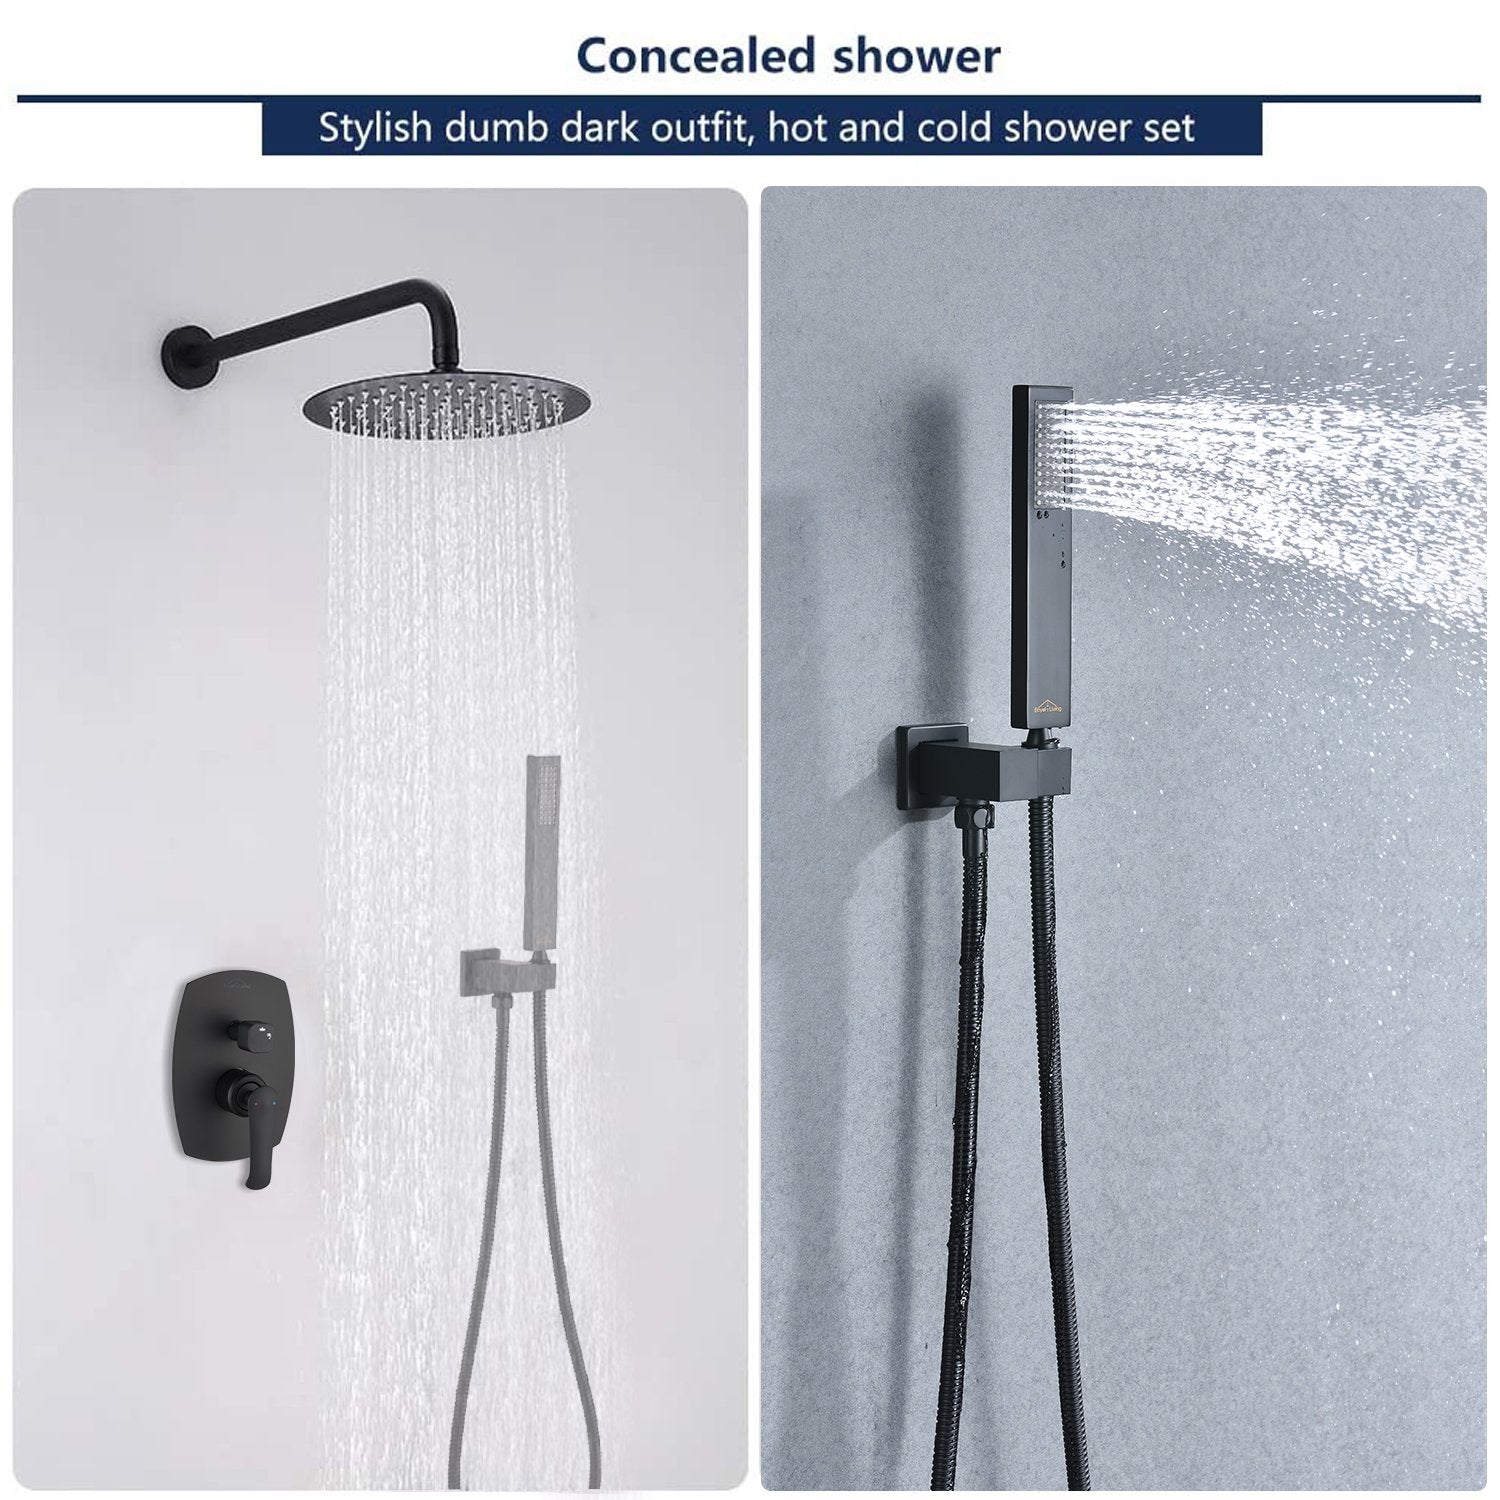 New Complete Shower System 1-Spray Patterns with 2.5 GPM 10 in. Wall Mount Dual Shower Heads in Matte Black - Alipuinc